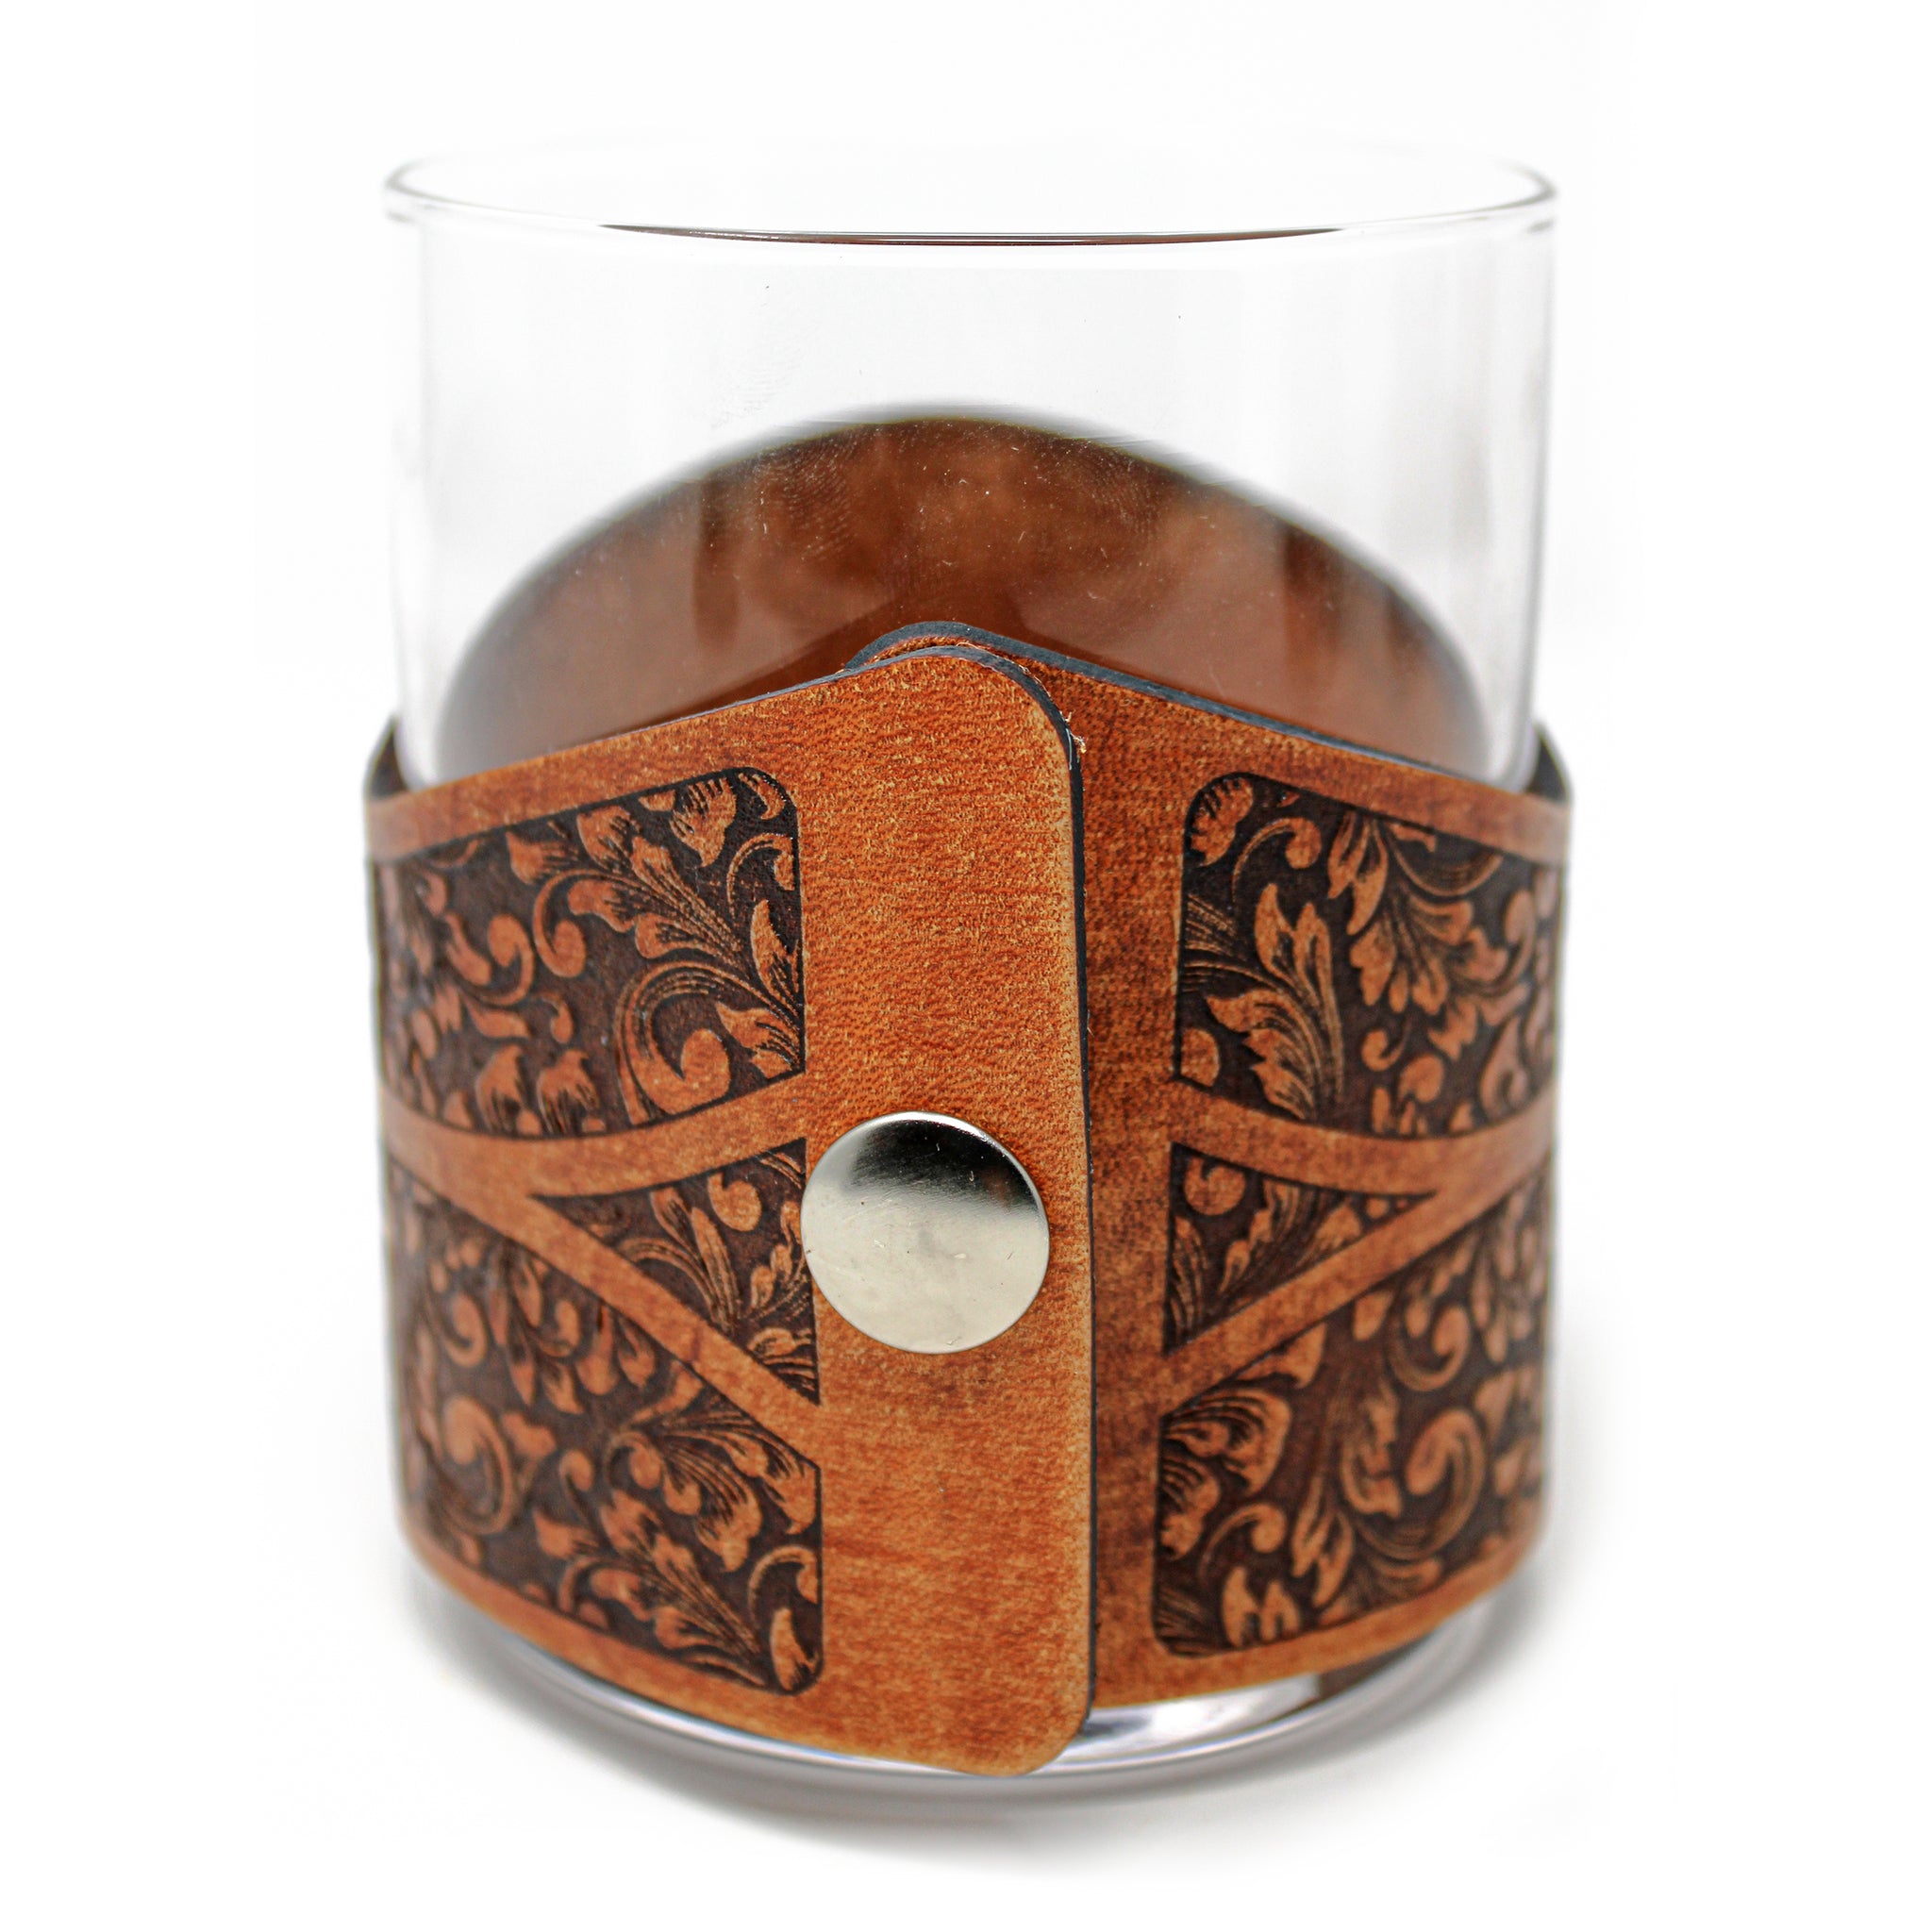 Whiskey Glass Leather Wrap - Marlin Engraver glass